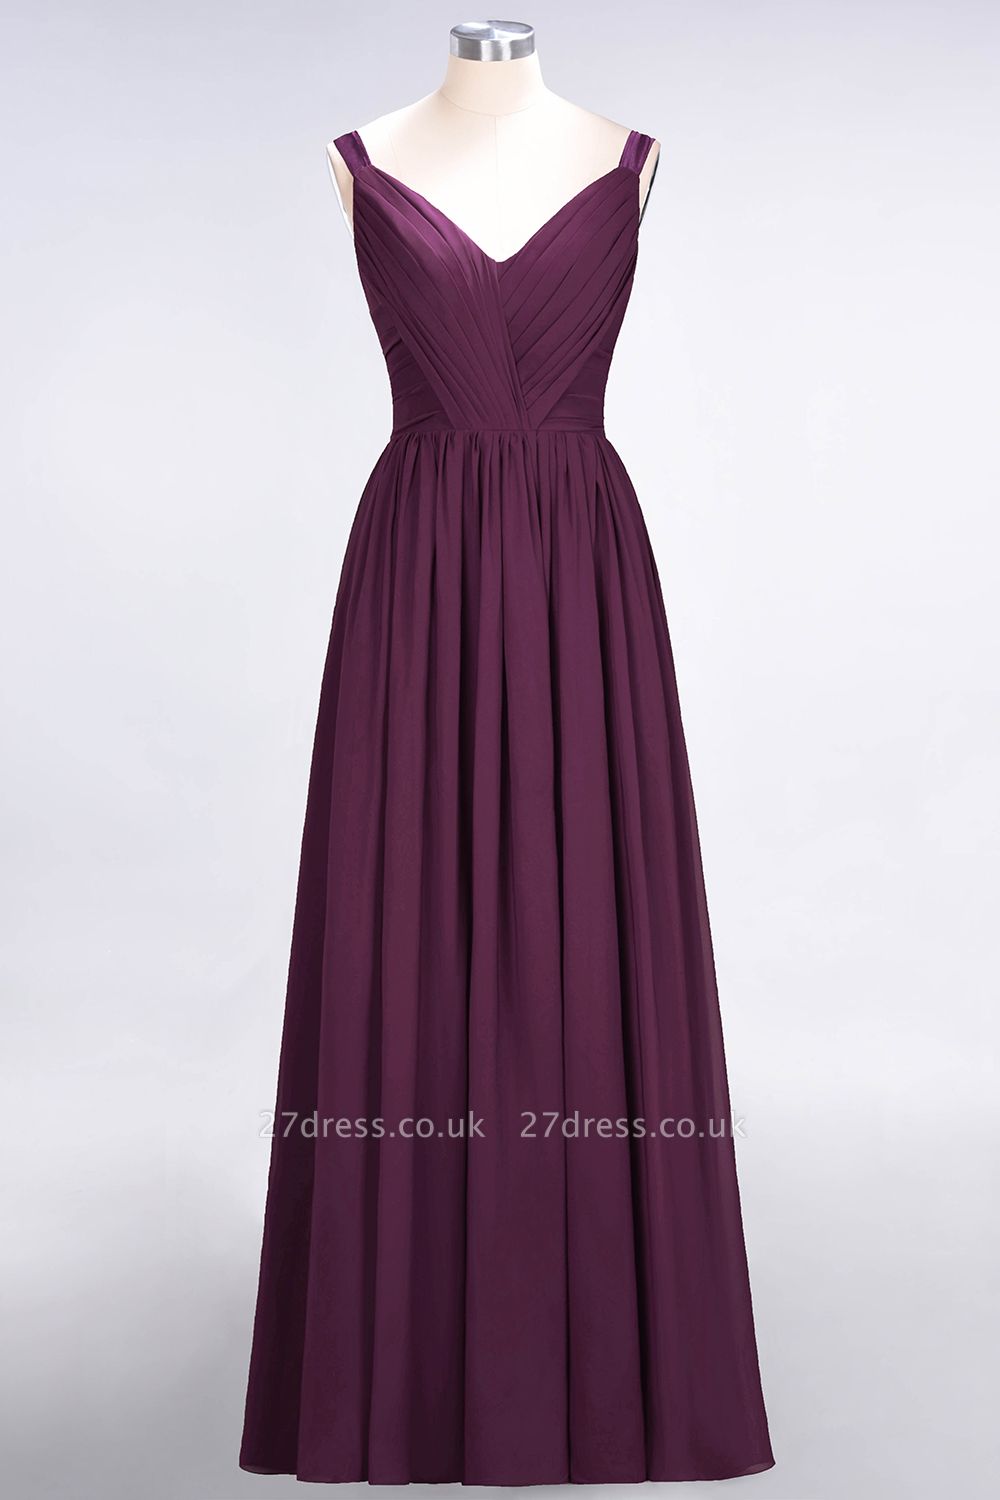 Sexy A-line Flowy Straps Alluring V-neck Sleeveless Backless Floor-Length Bridesmaid Dress UK UK with Ruffles